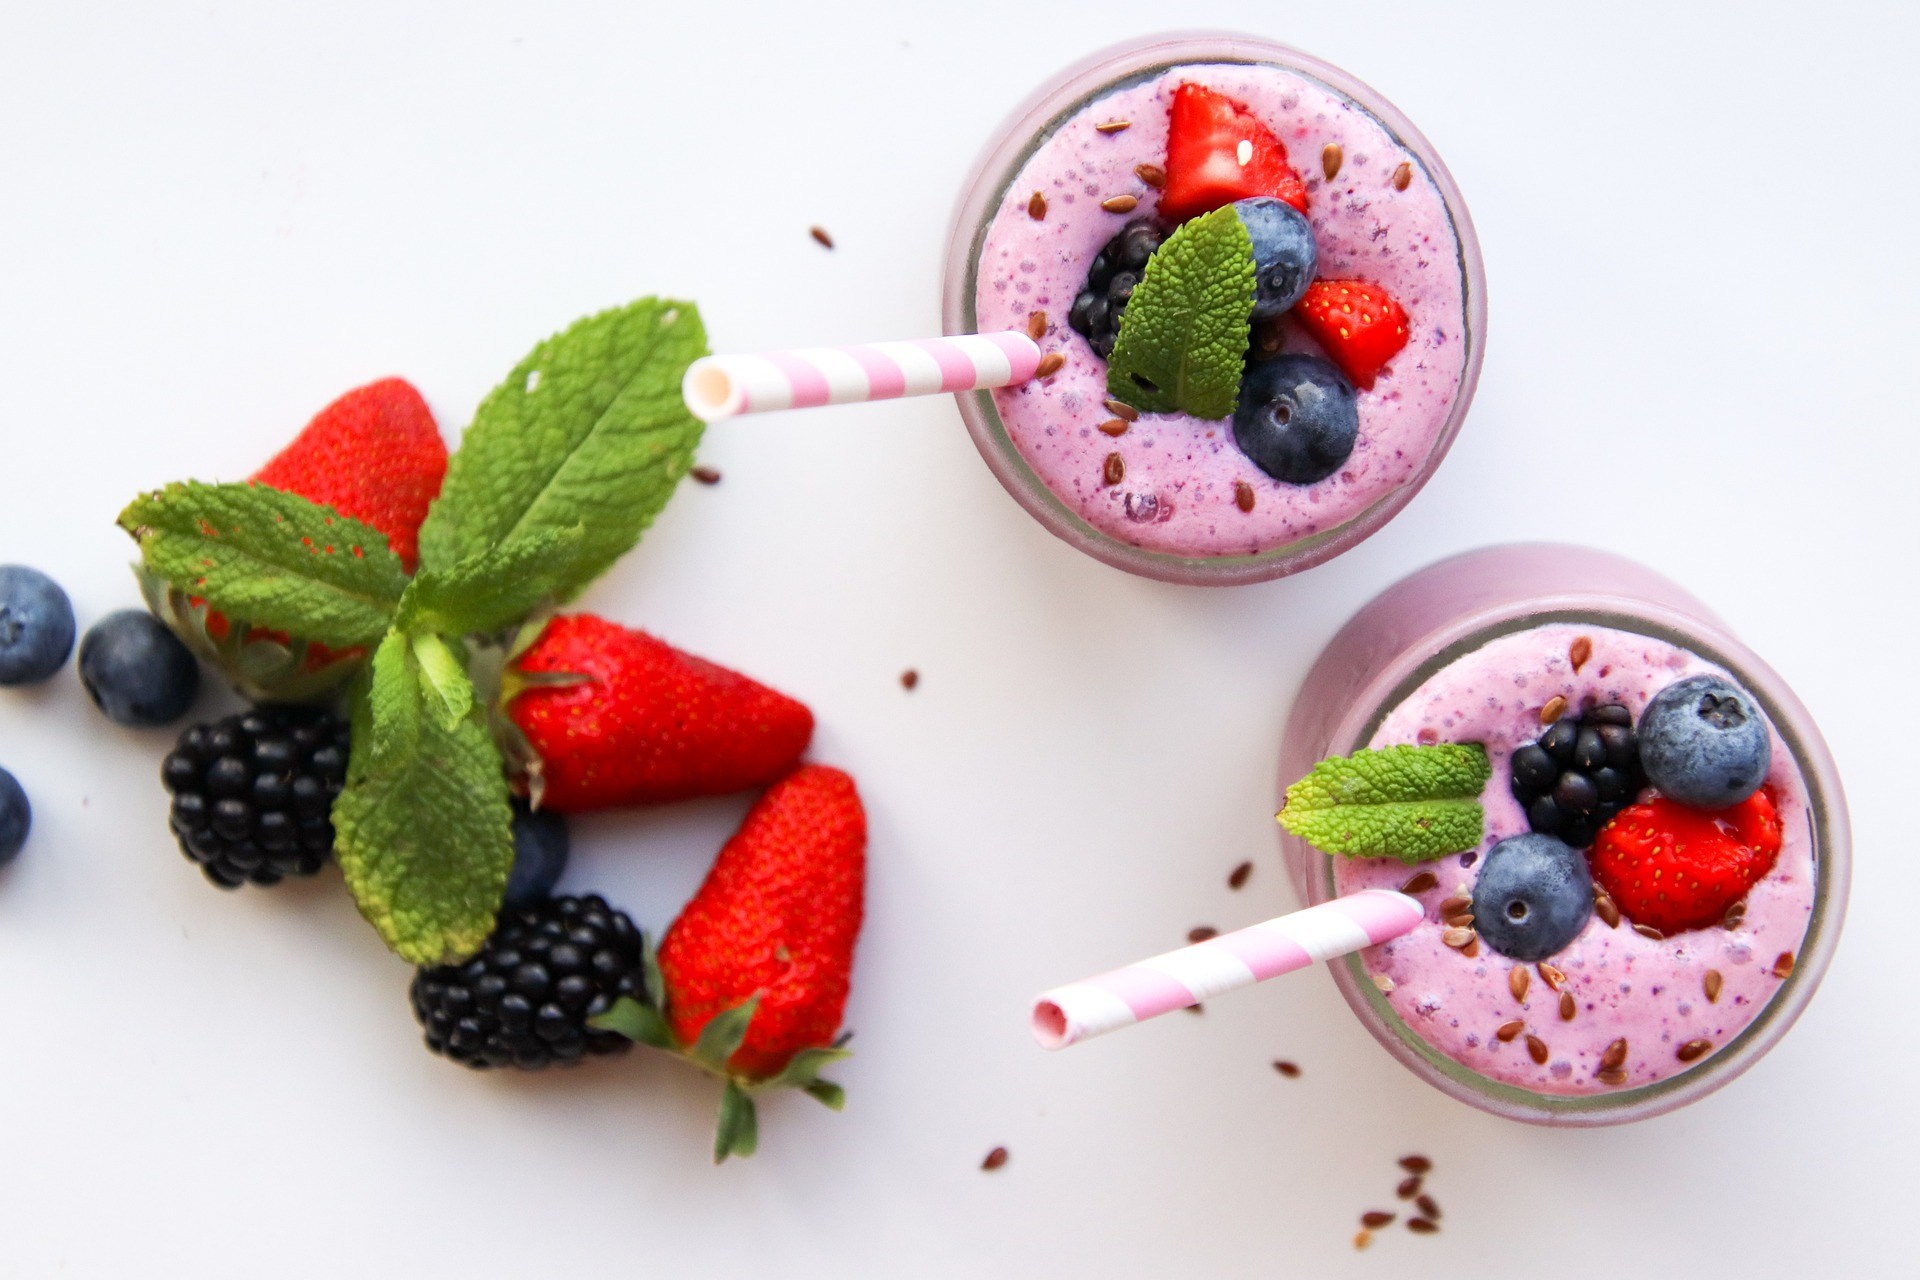 Try These Summer Smoothie Recipes With Nutritious Wild Blueberries